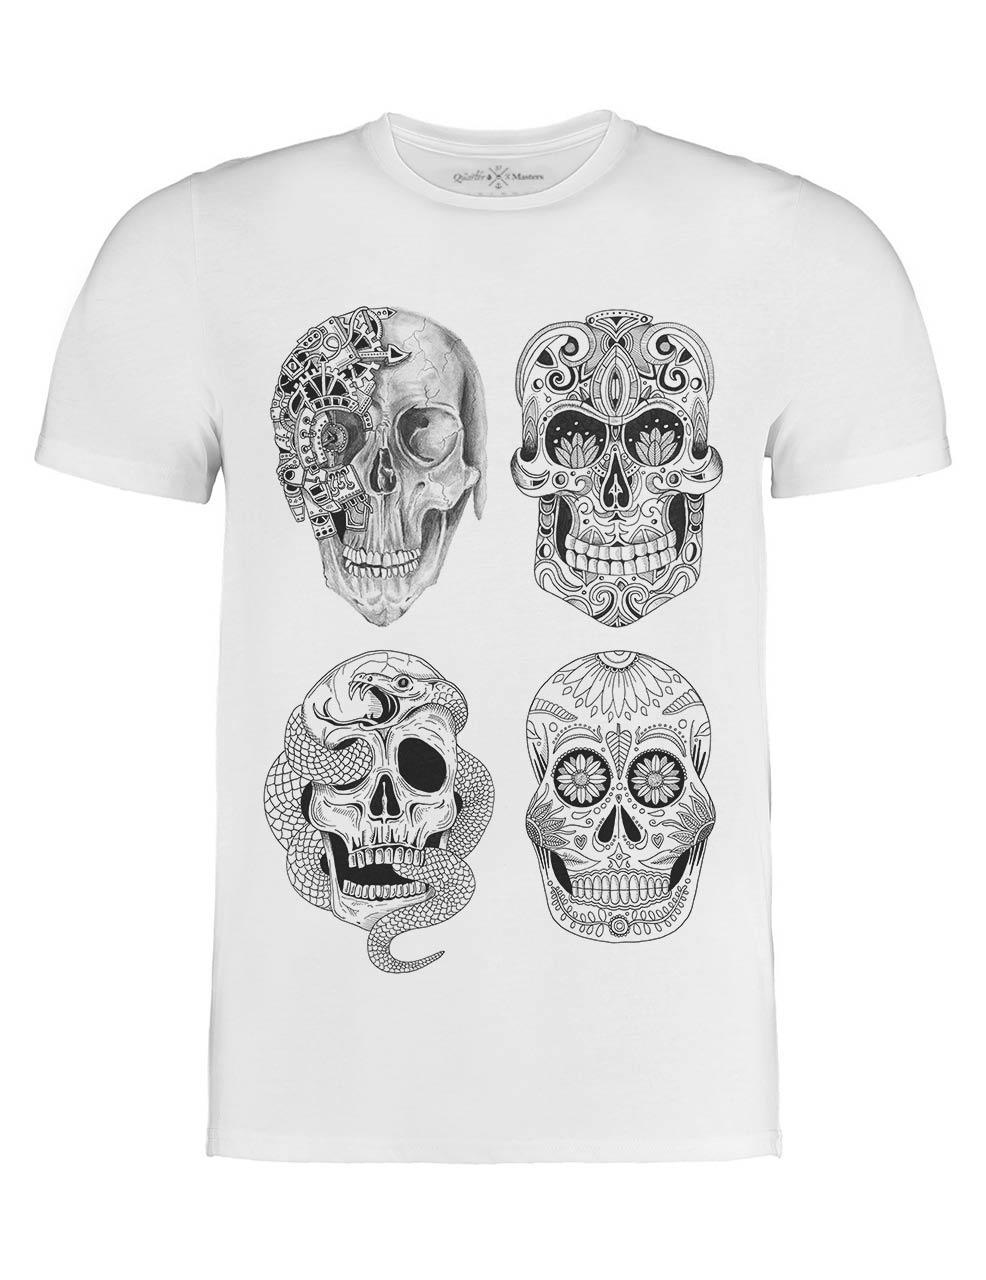 Four Skulls T-shirt by Squidoodle